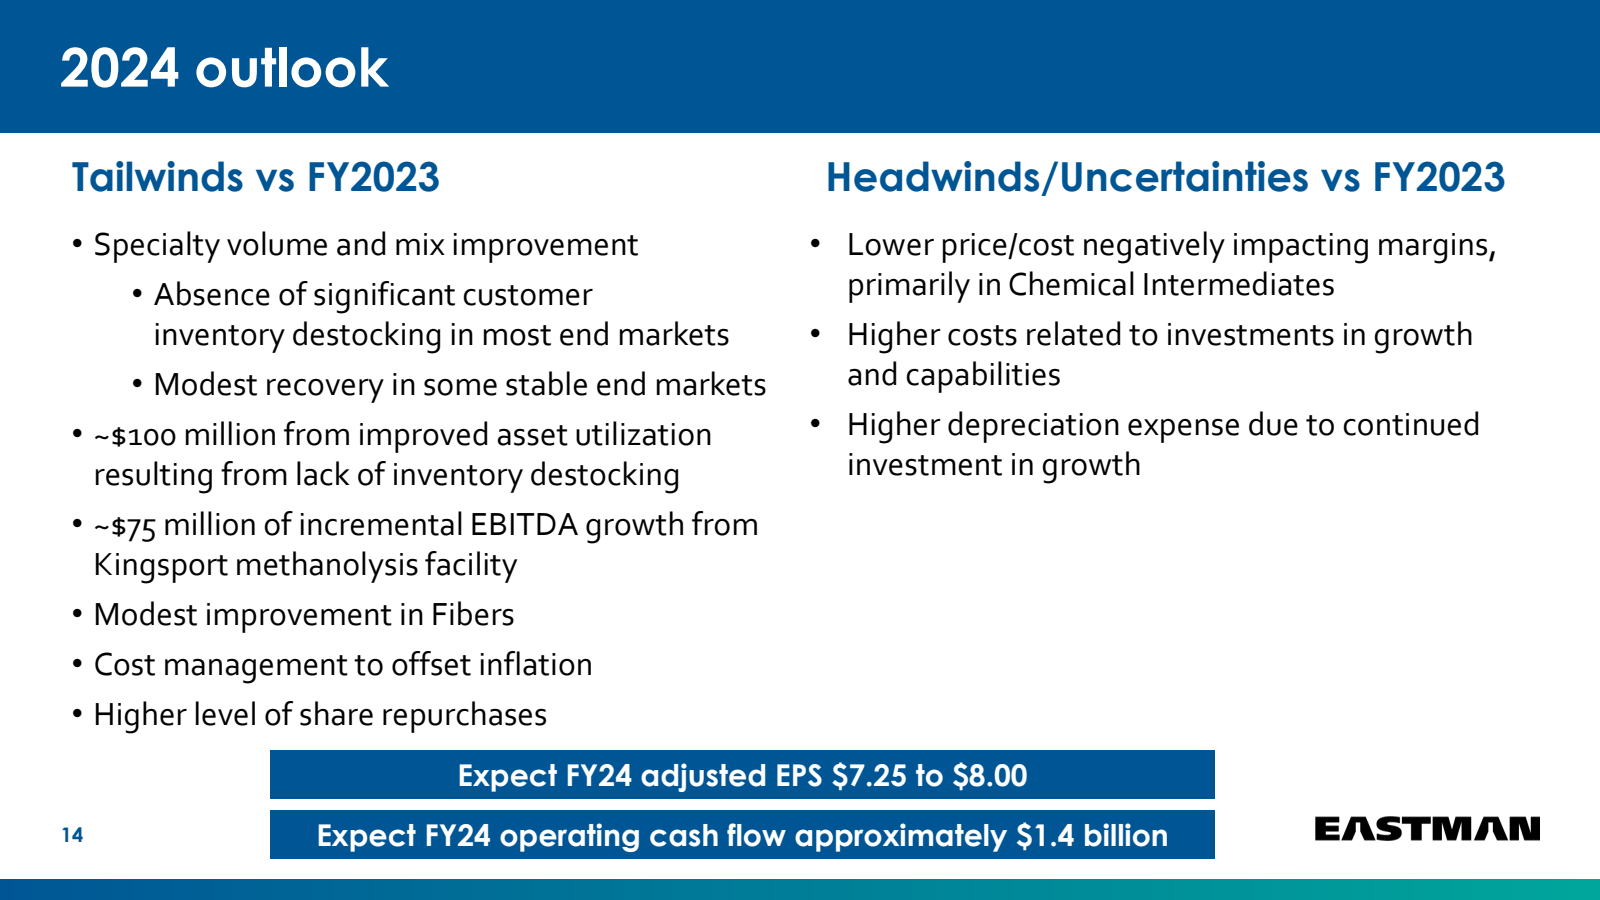 2024 outlook 

Tailw